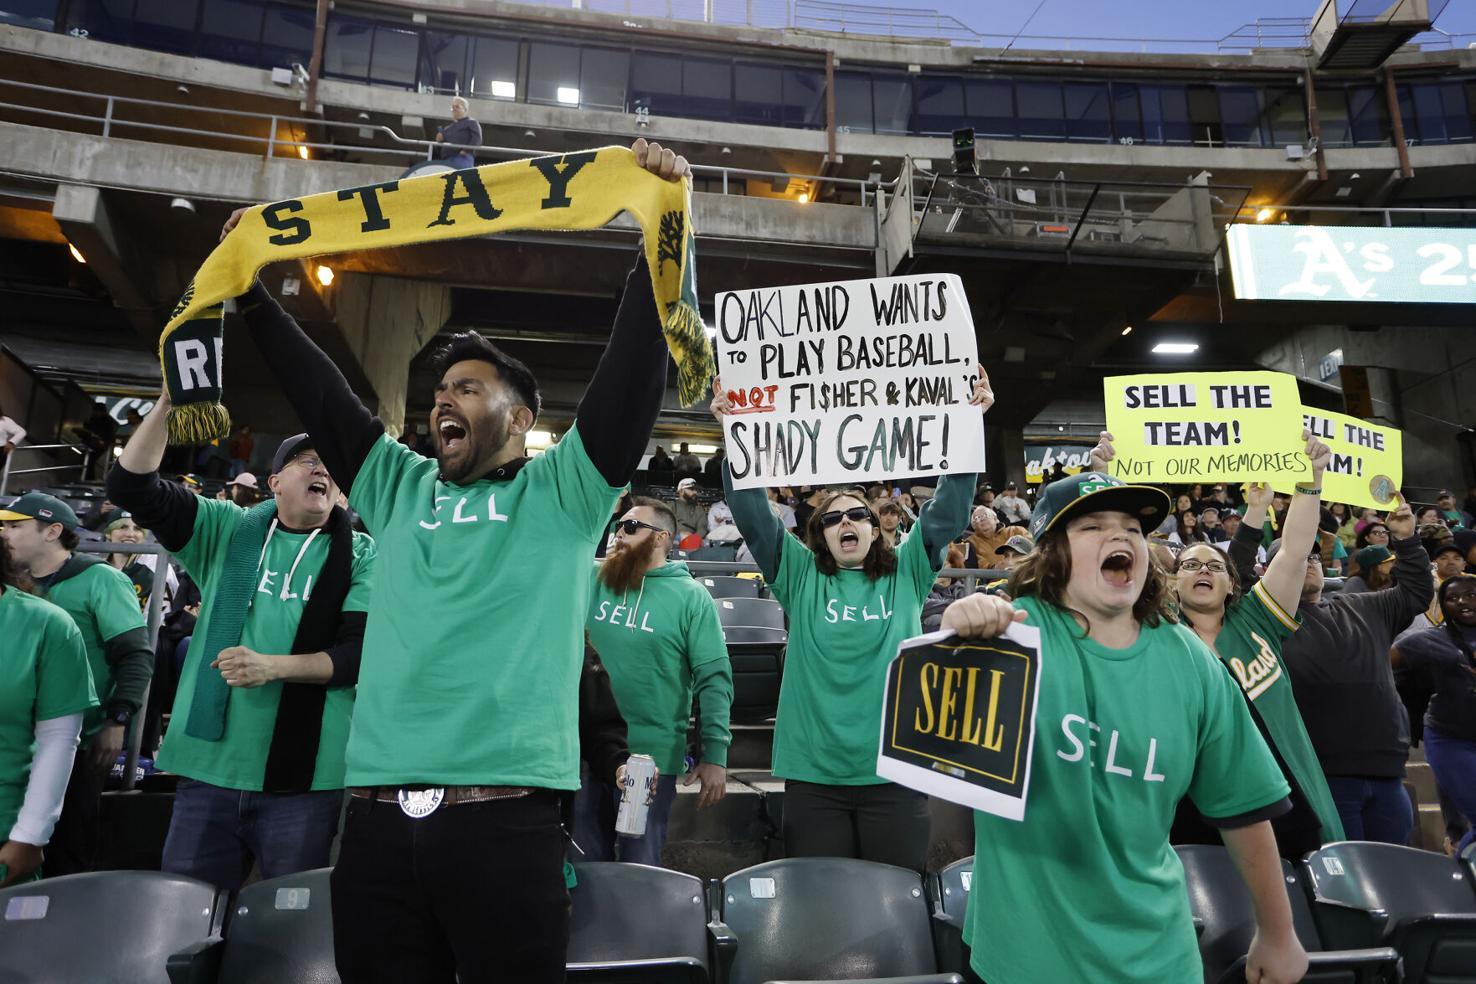 Pirates owner Bob Nutting took a picture with a fan wearing a 'Sell the  Team' shirt in protest.